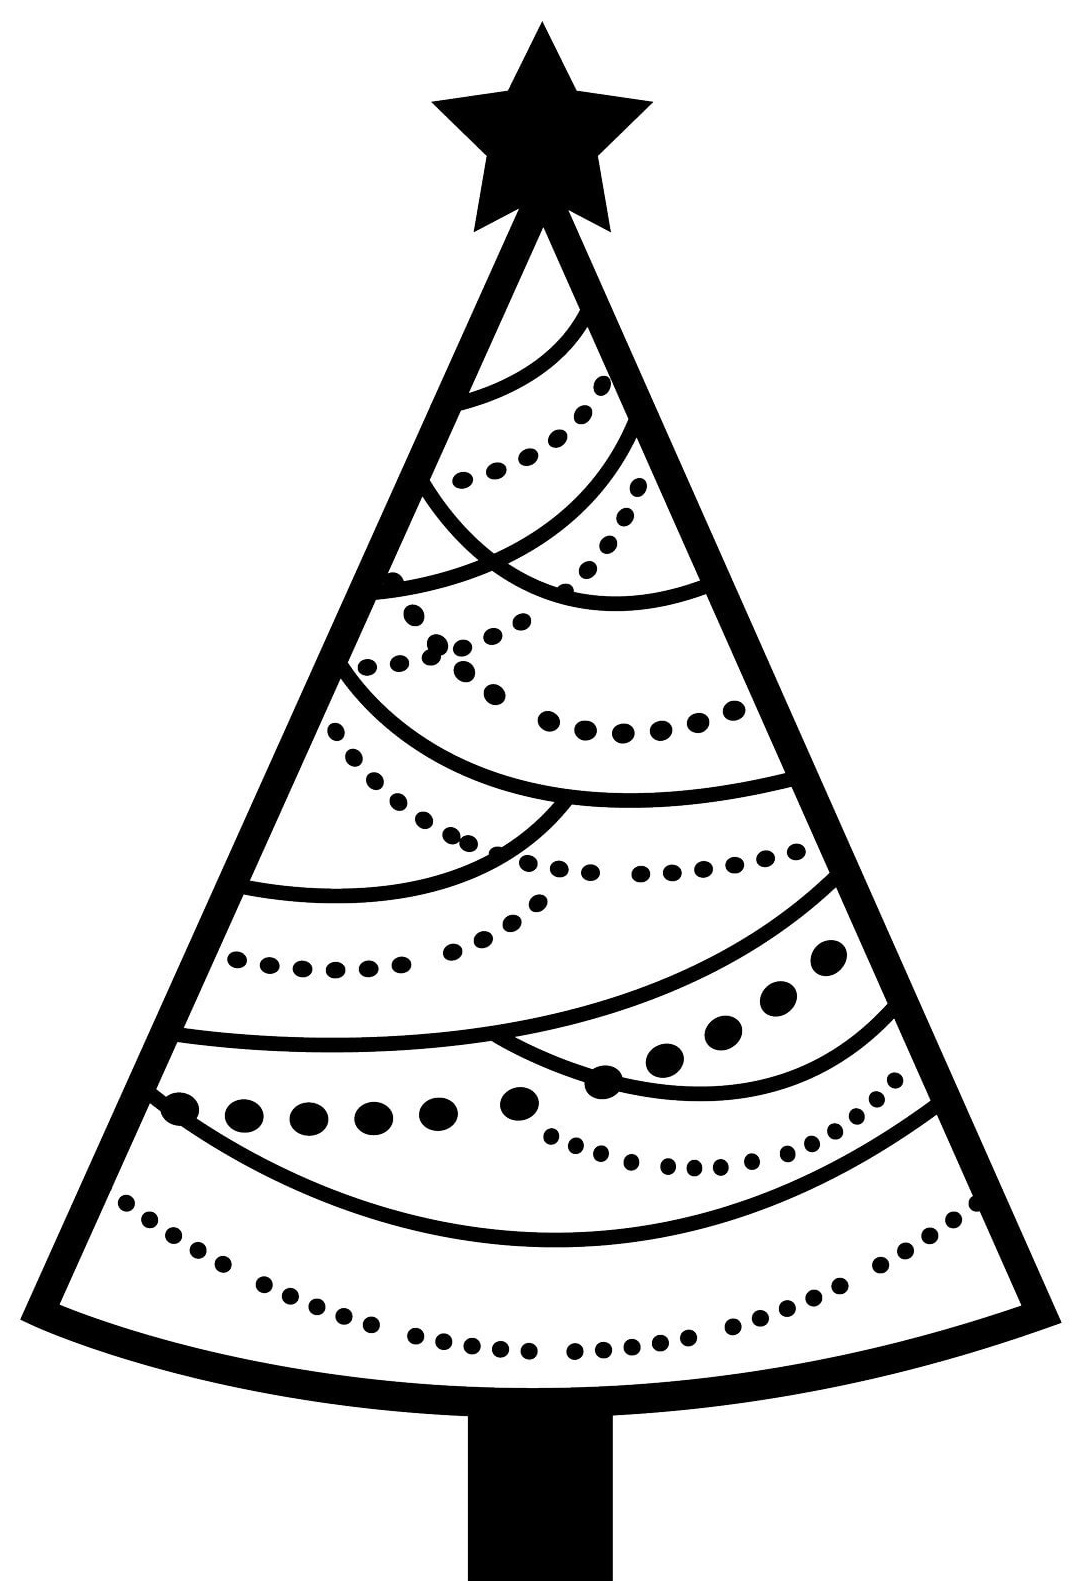 Pretty And Simple Christmas Tree With Garlands Coloring Page